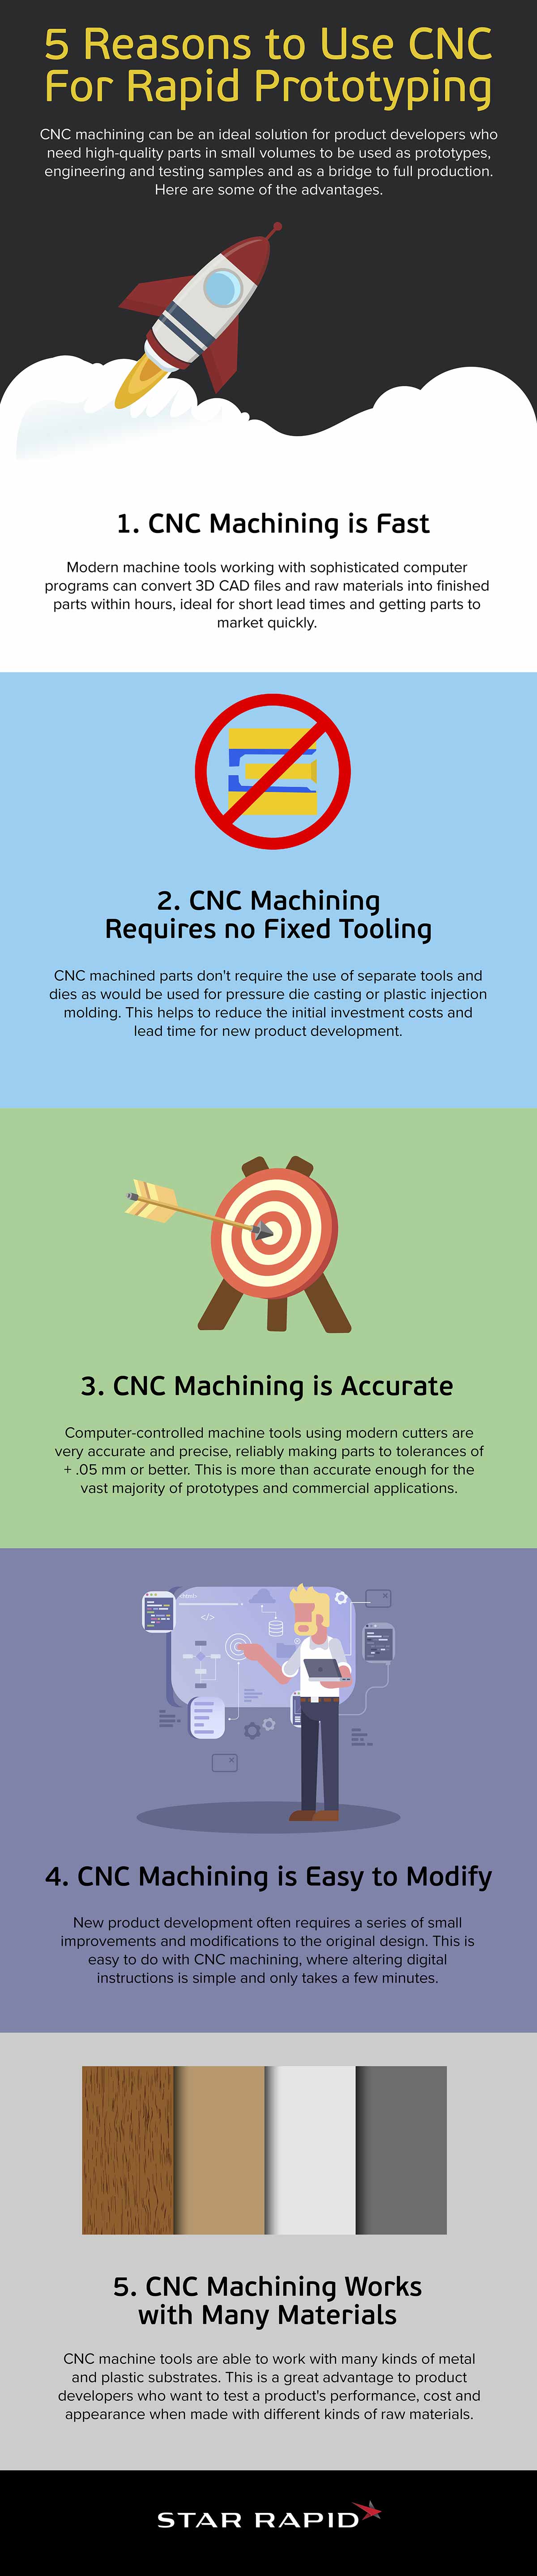 CNC for prototyping infographic